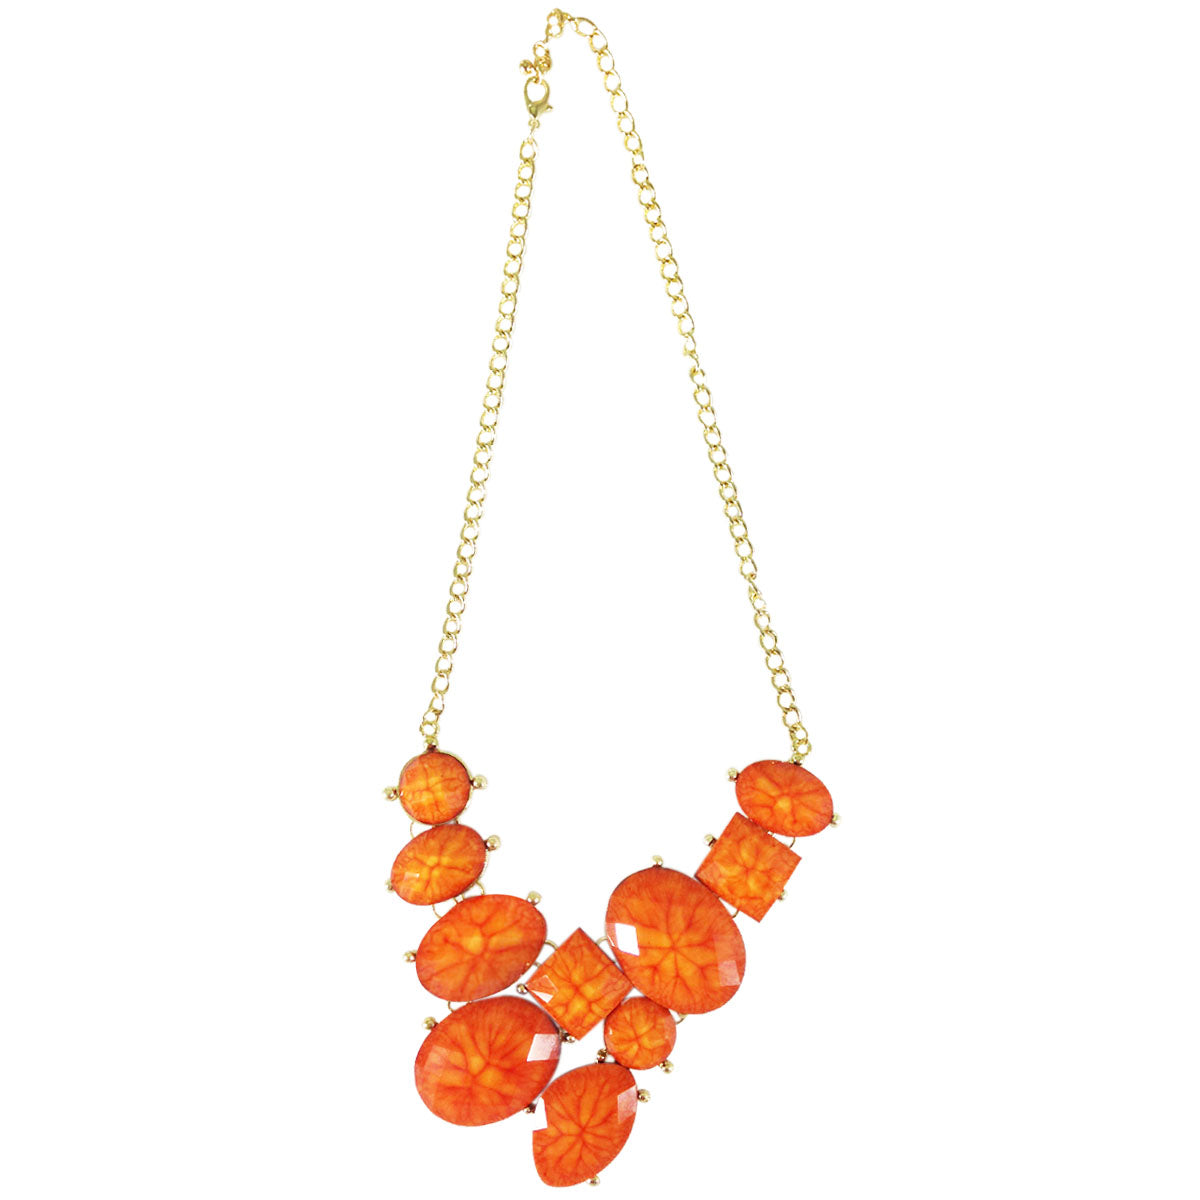 Wrapables Faceted Resin Bubble Bib Statement Necklace